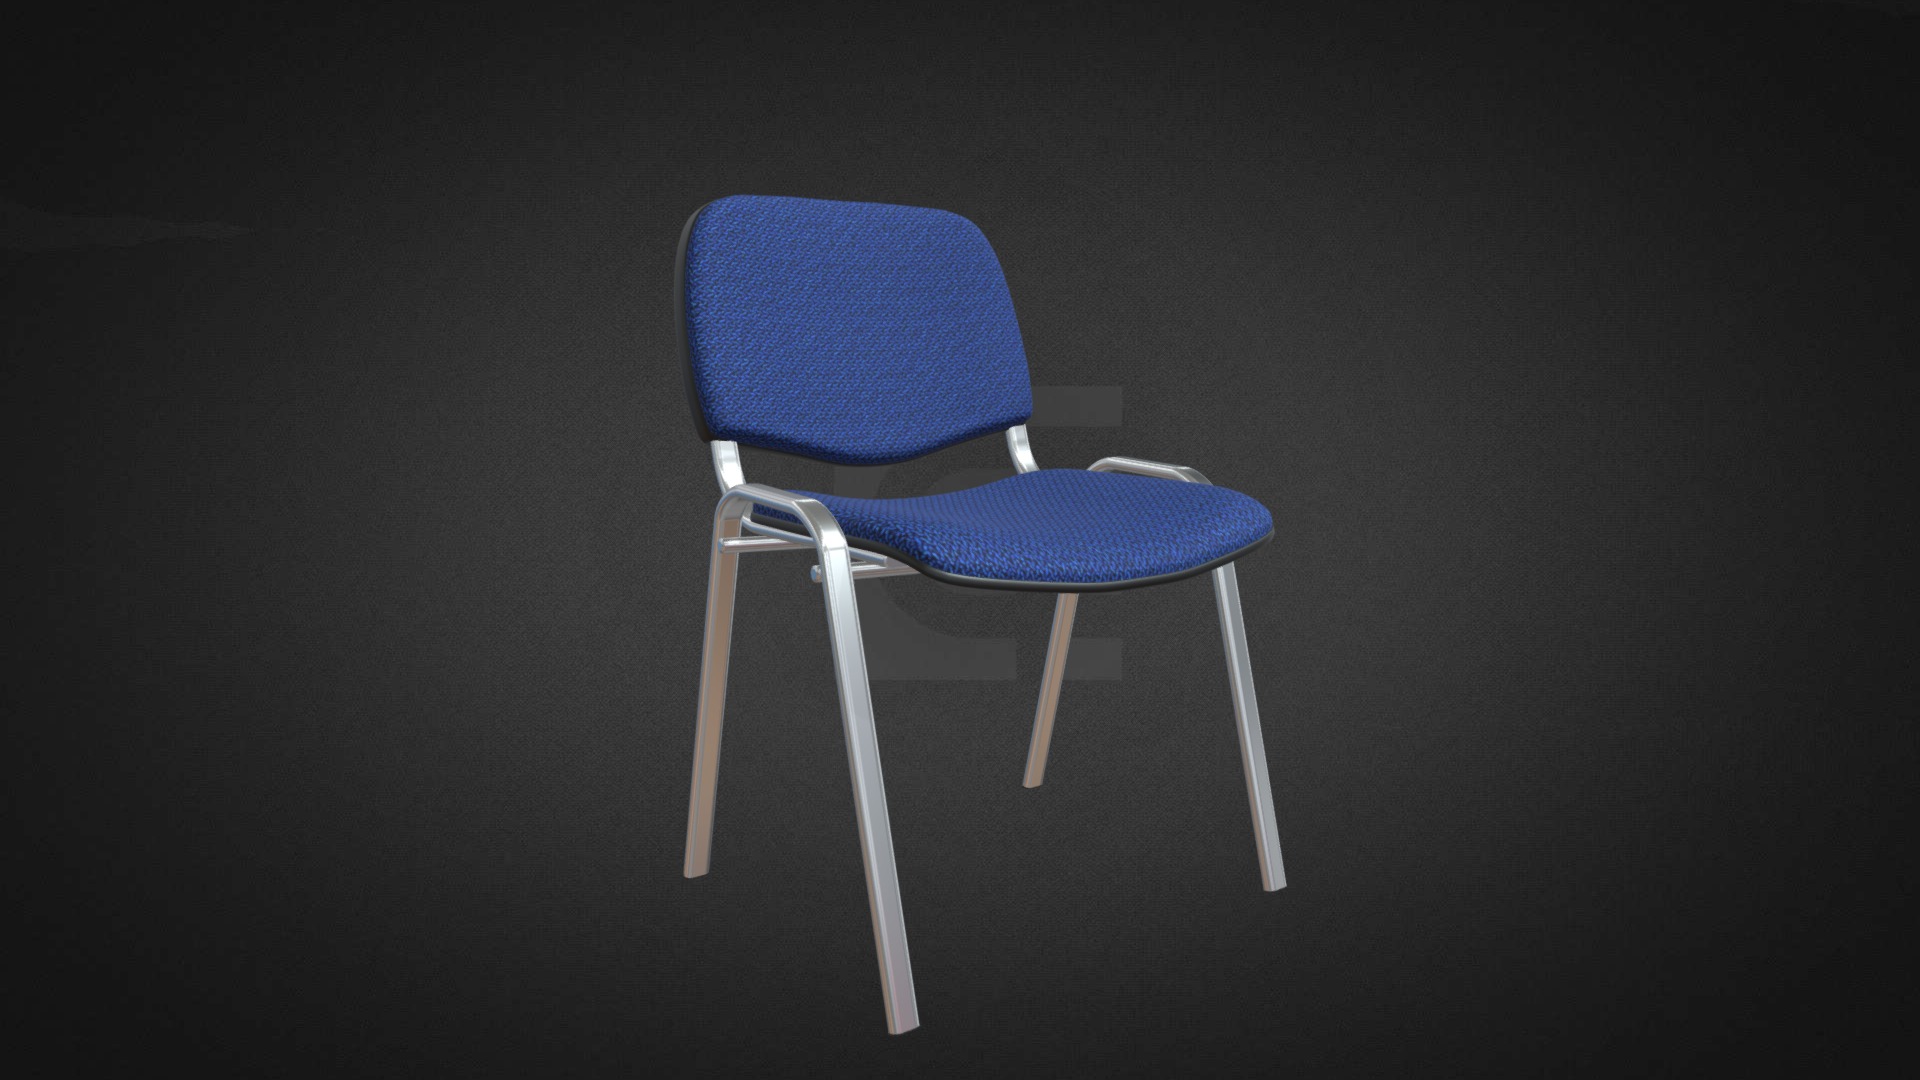 3D model Linking Chair Hire - This is a 3D model of the Linking Chair Hire. The 3D model is about a blue chair on a black background.